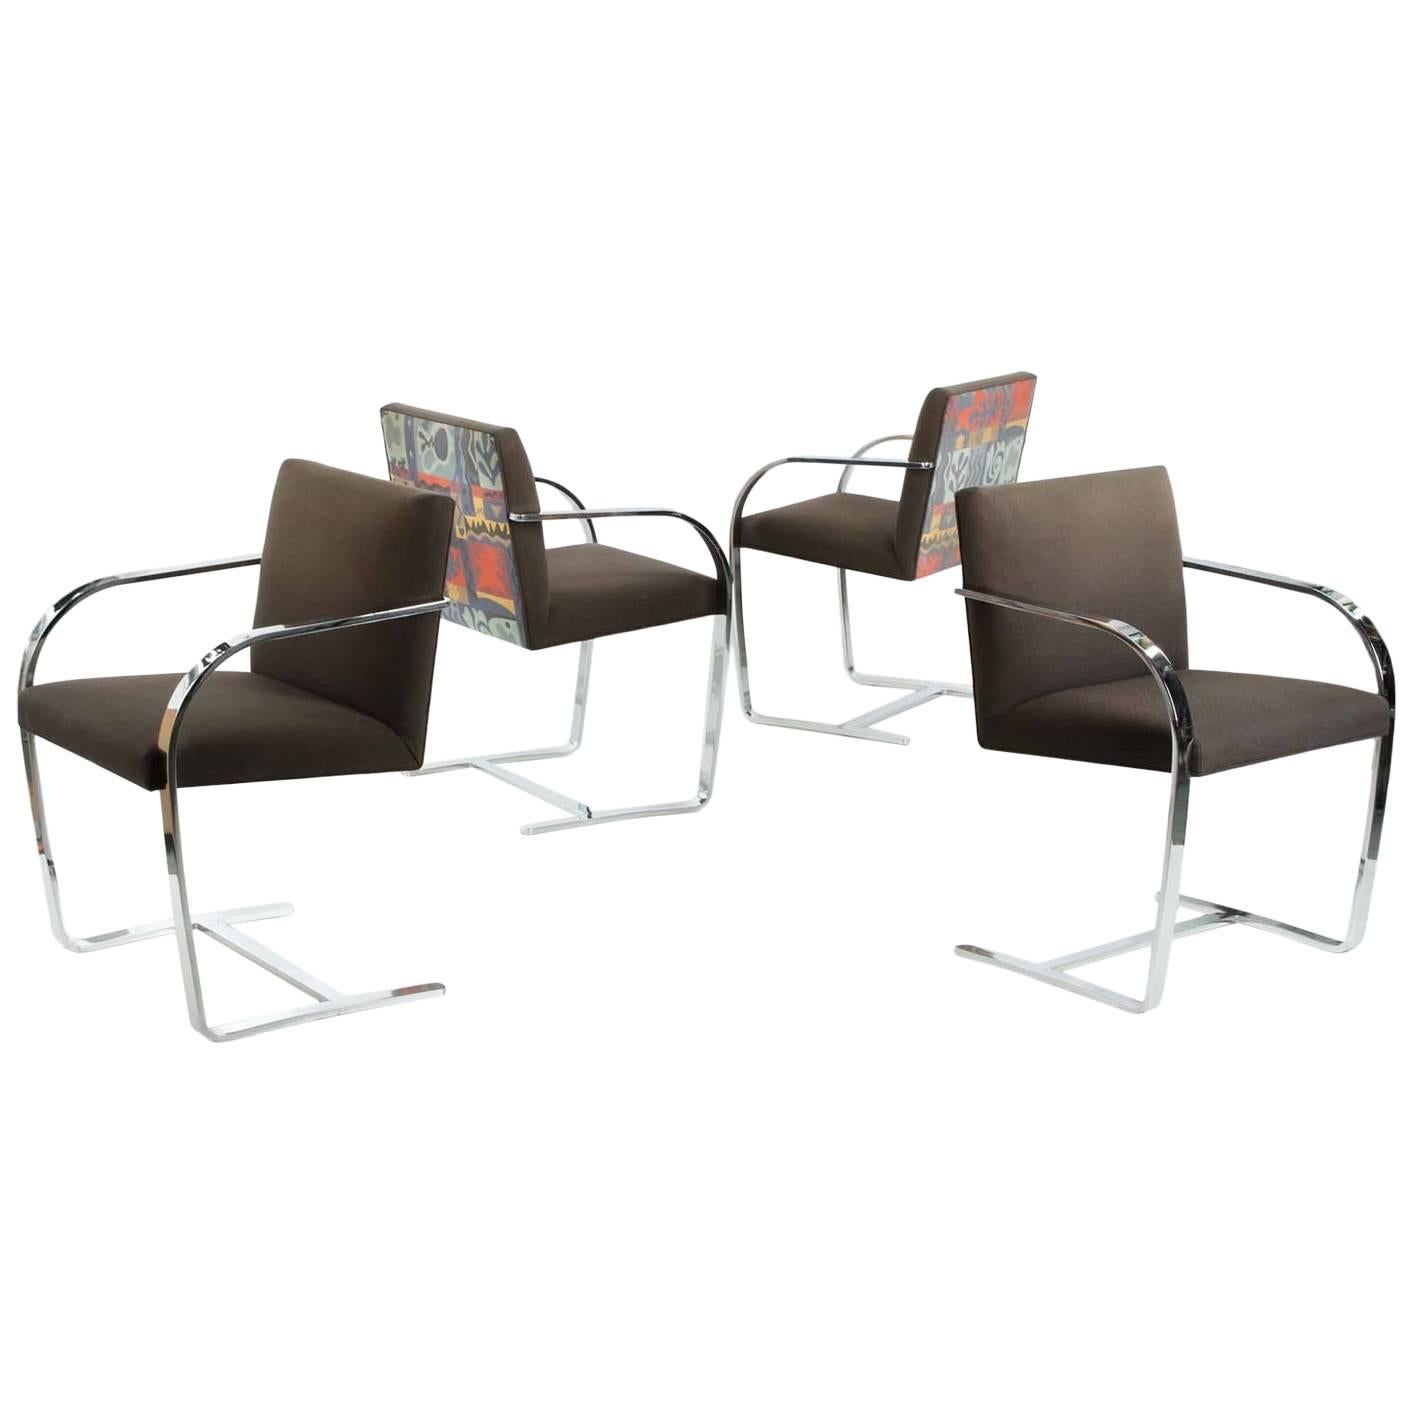 Vintage Set of Four Chromed Flat Arm Chairs after Mies Van Der Rohe BRNO